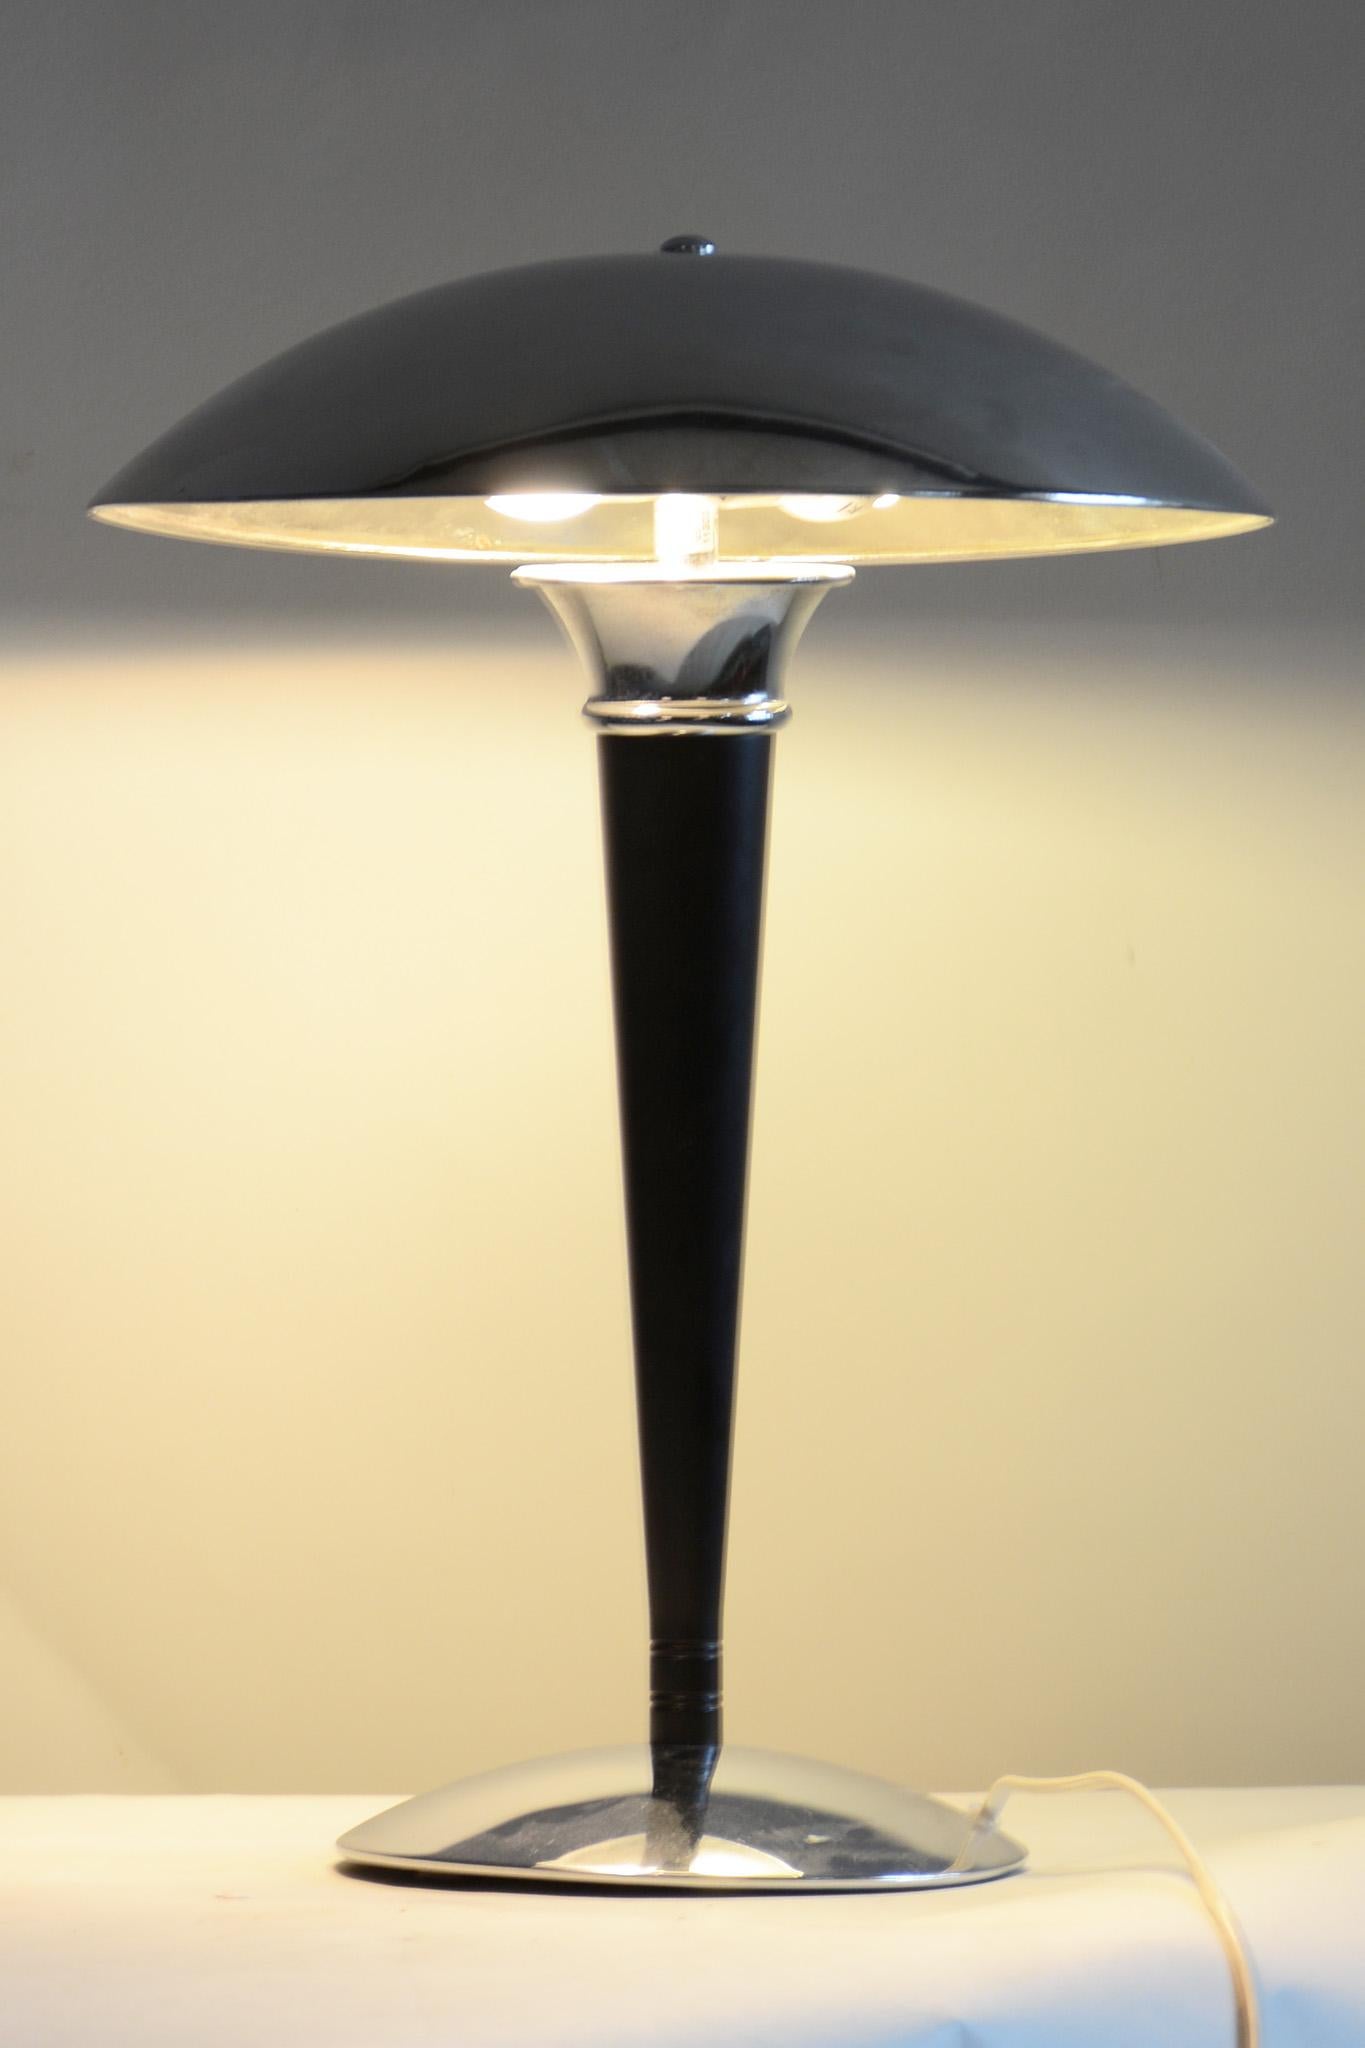 Mid-Century Modern Pair of Midcentury Black Table Lamps, Chrome-Plated Steel, Germany, 1950s